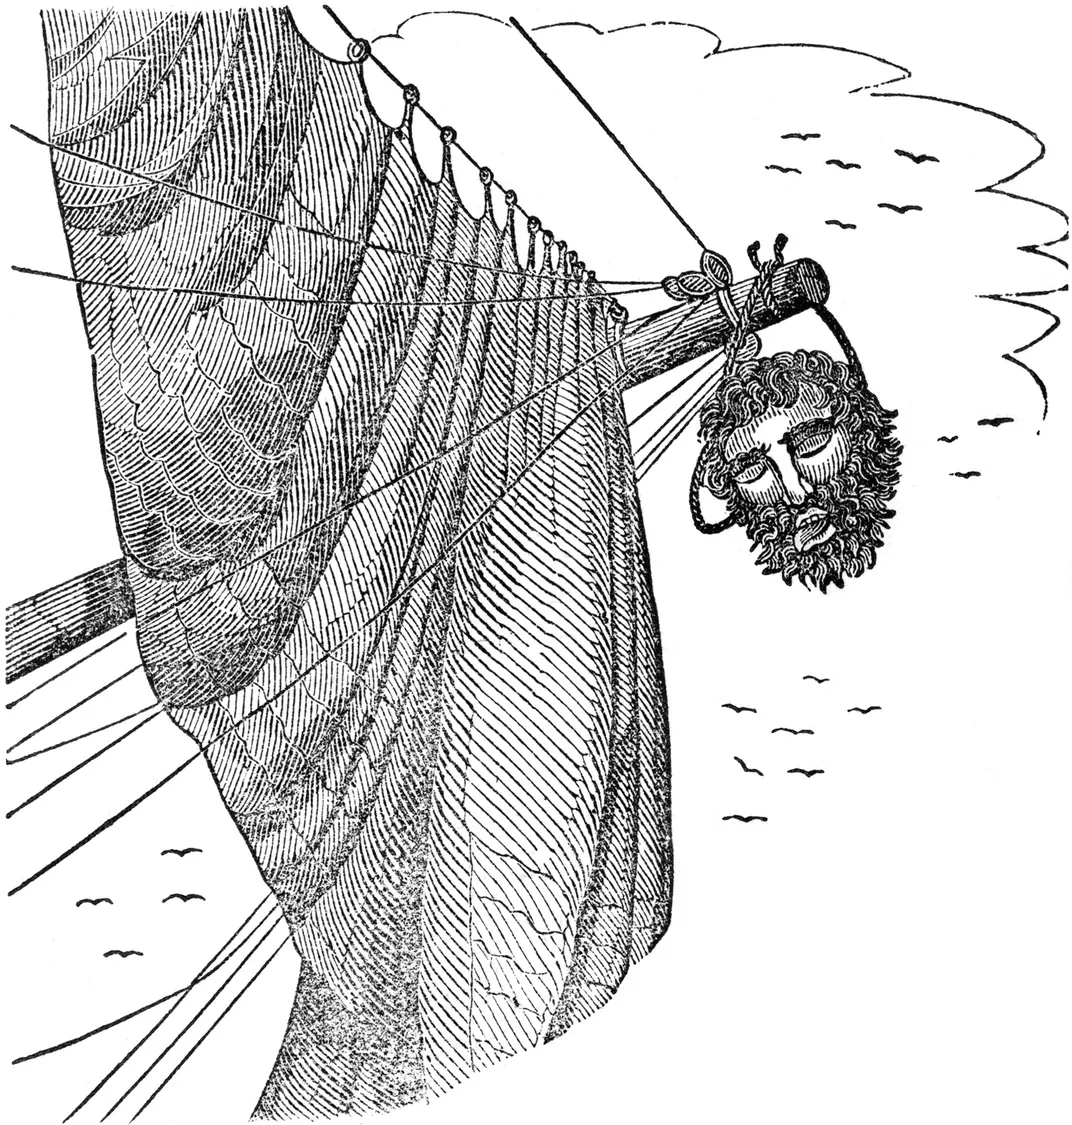 An illustration of Blackbeard's head, hanging from the bowsprit of a ship